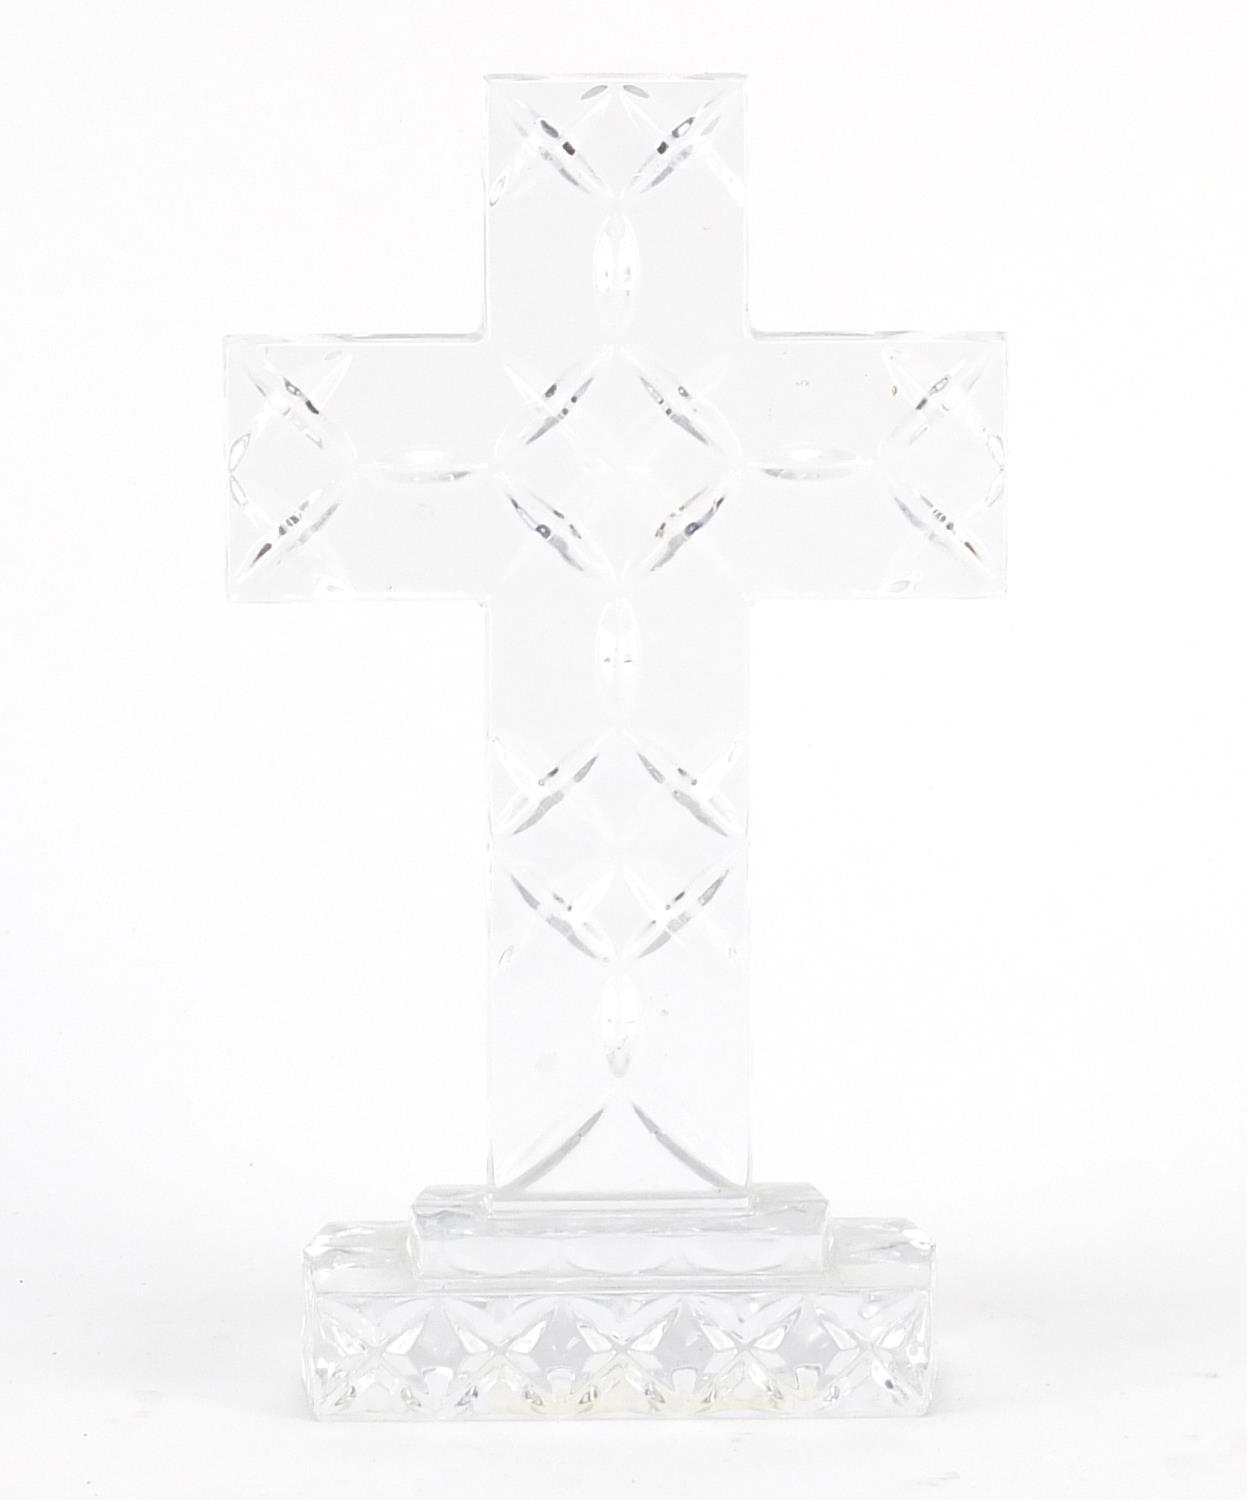 Ragaika crystal crucifix paperweight, 26cm high : For Further Condition Reports Please visit our